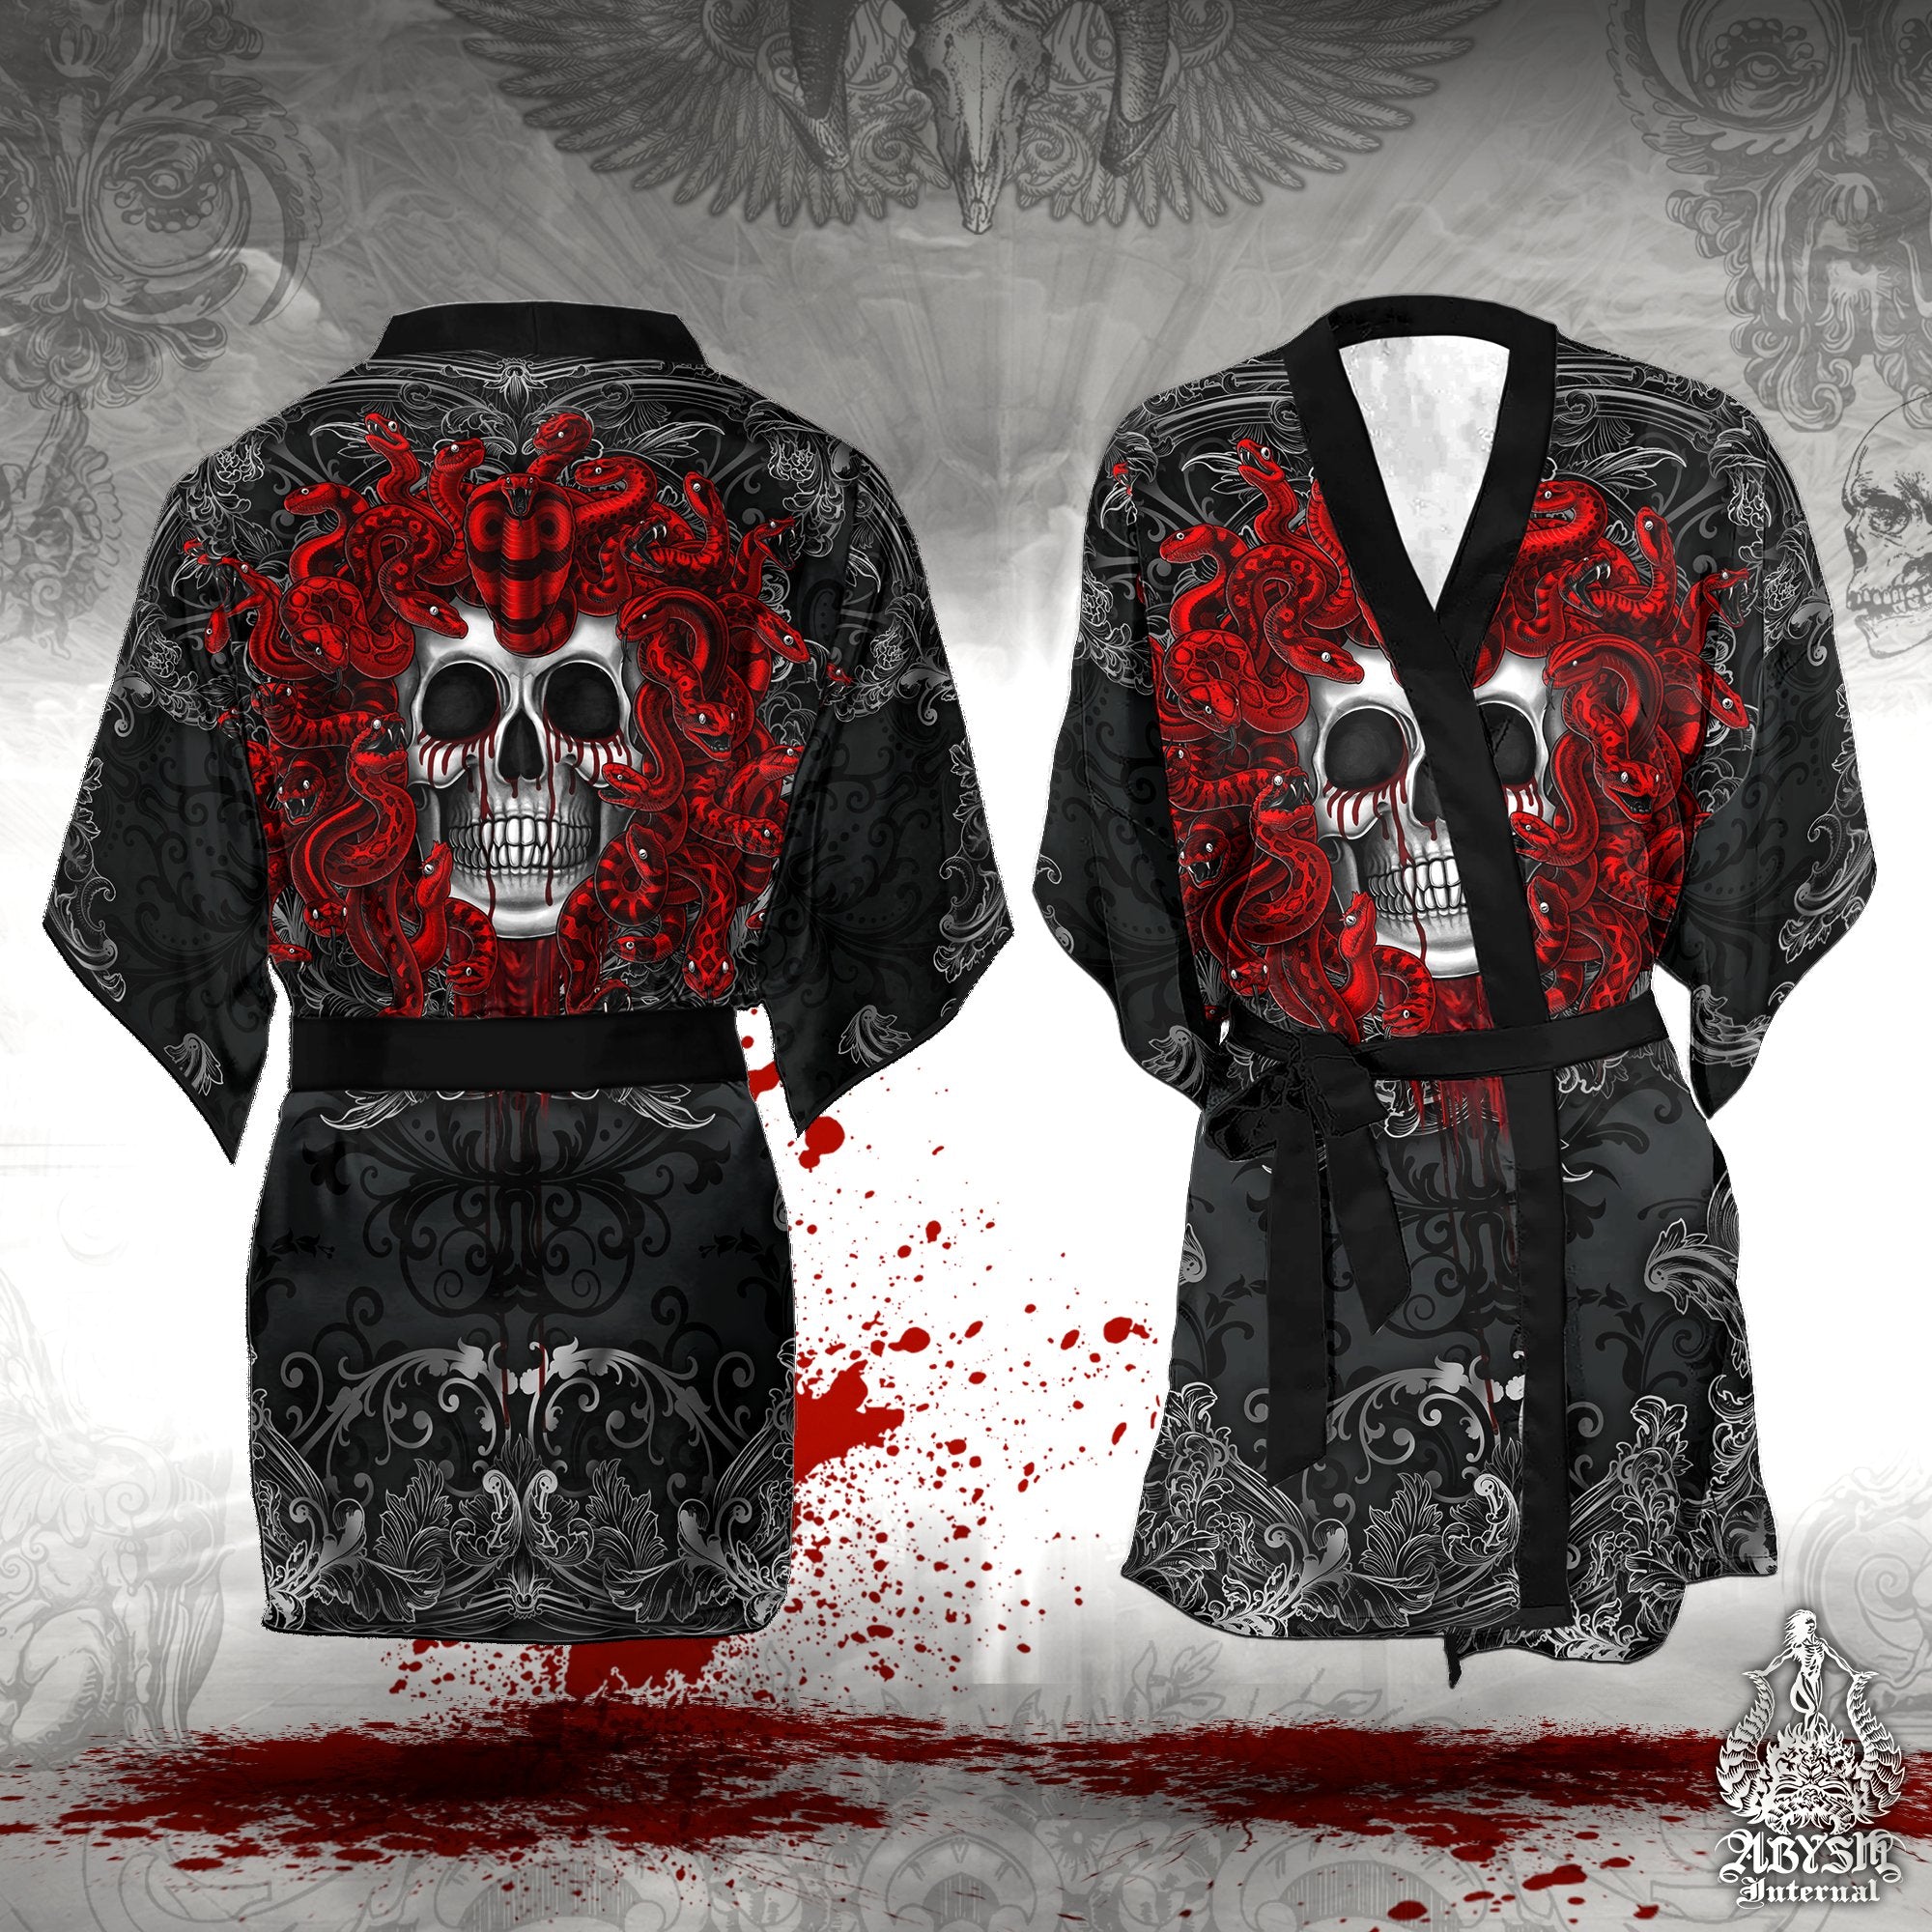 Black Gothic Short Kimono Robe, Beach Party Outfit, Medusa Coverup, Summer Festival, Nu Goth Alternative Clothing, Unisex - Skull, 2 Faces, 3 Colors - Abysm Internal